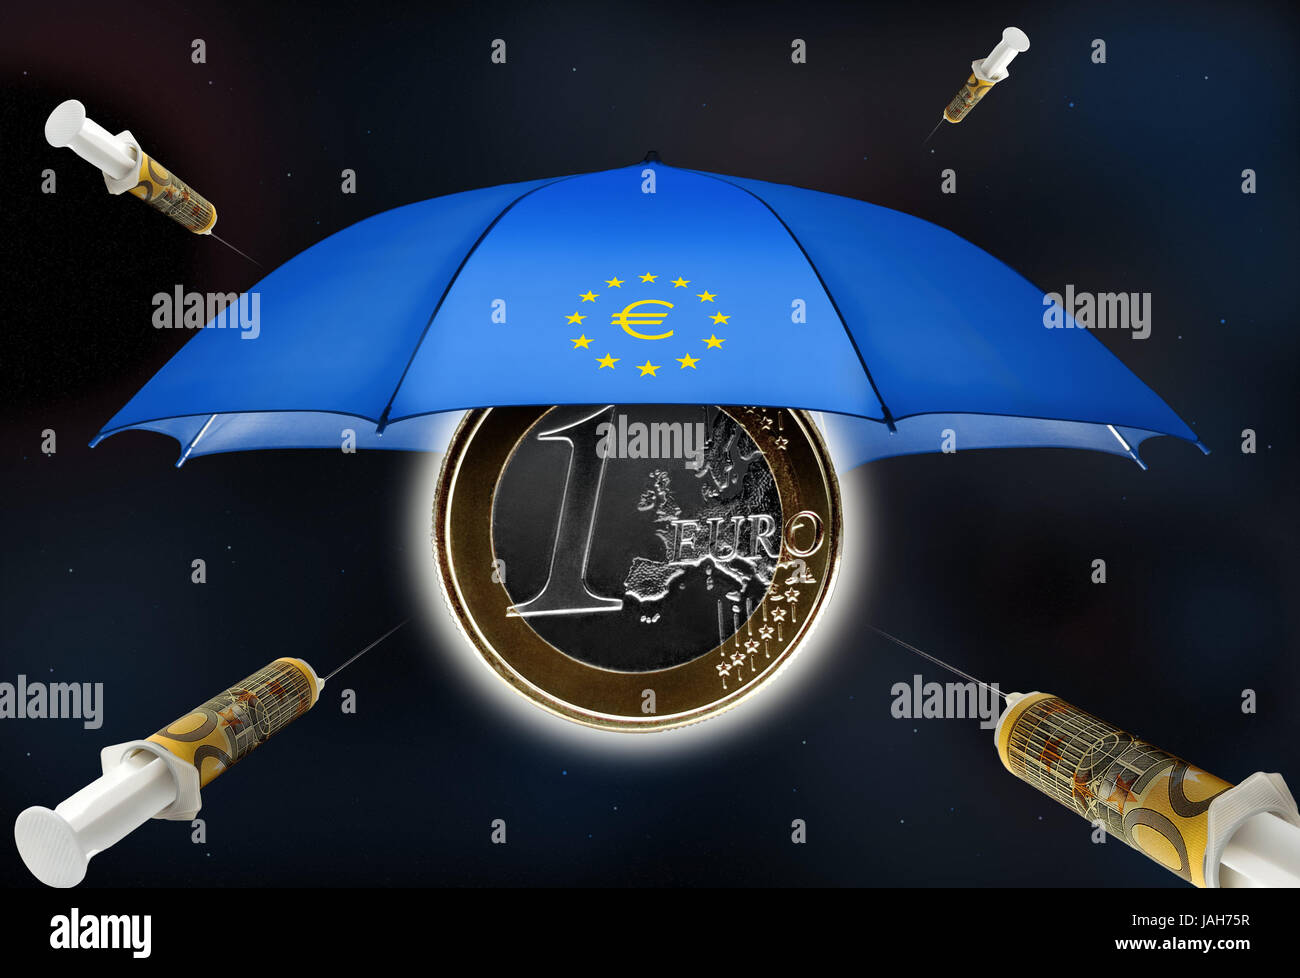 Europrotective display screen,euro coin,injections of capital,icon,euro,coin,monetary coin,eurodisplay screen,protective display screen,eurostars,stars,syringes,monetary syringes,eurolight,icon,support,rescue display screen,debts,the EU,national debt,debt crisis,euroicon,state bankruptcy,currency,inflation,monetary crisis,computer graphics, Stock Photo